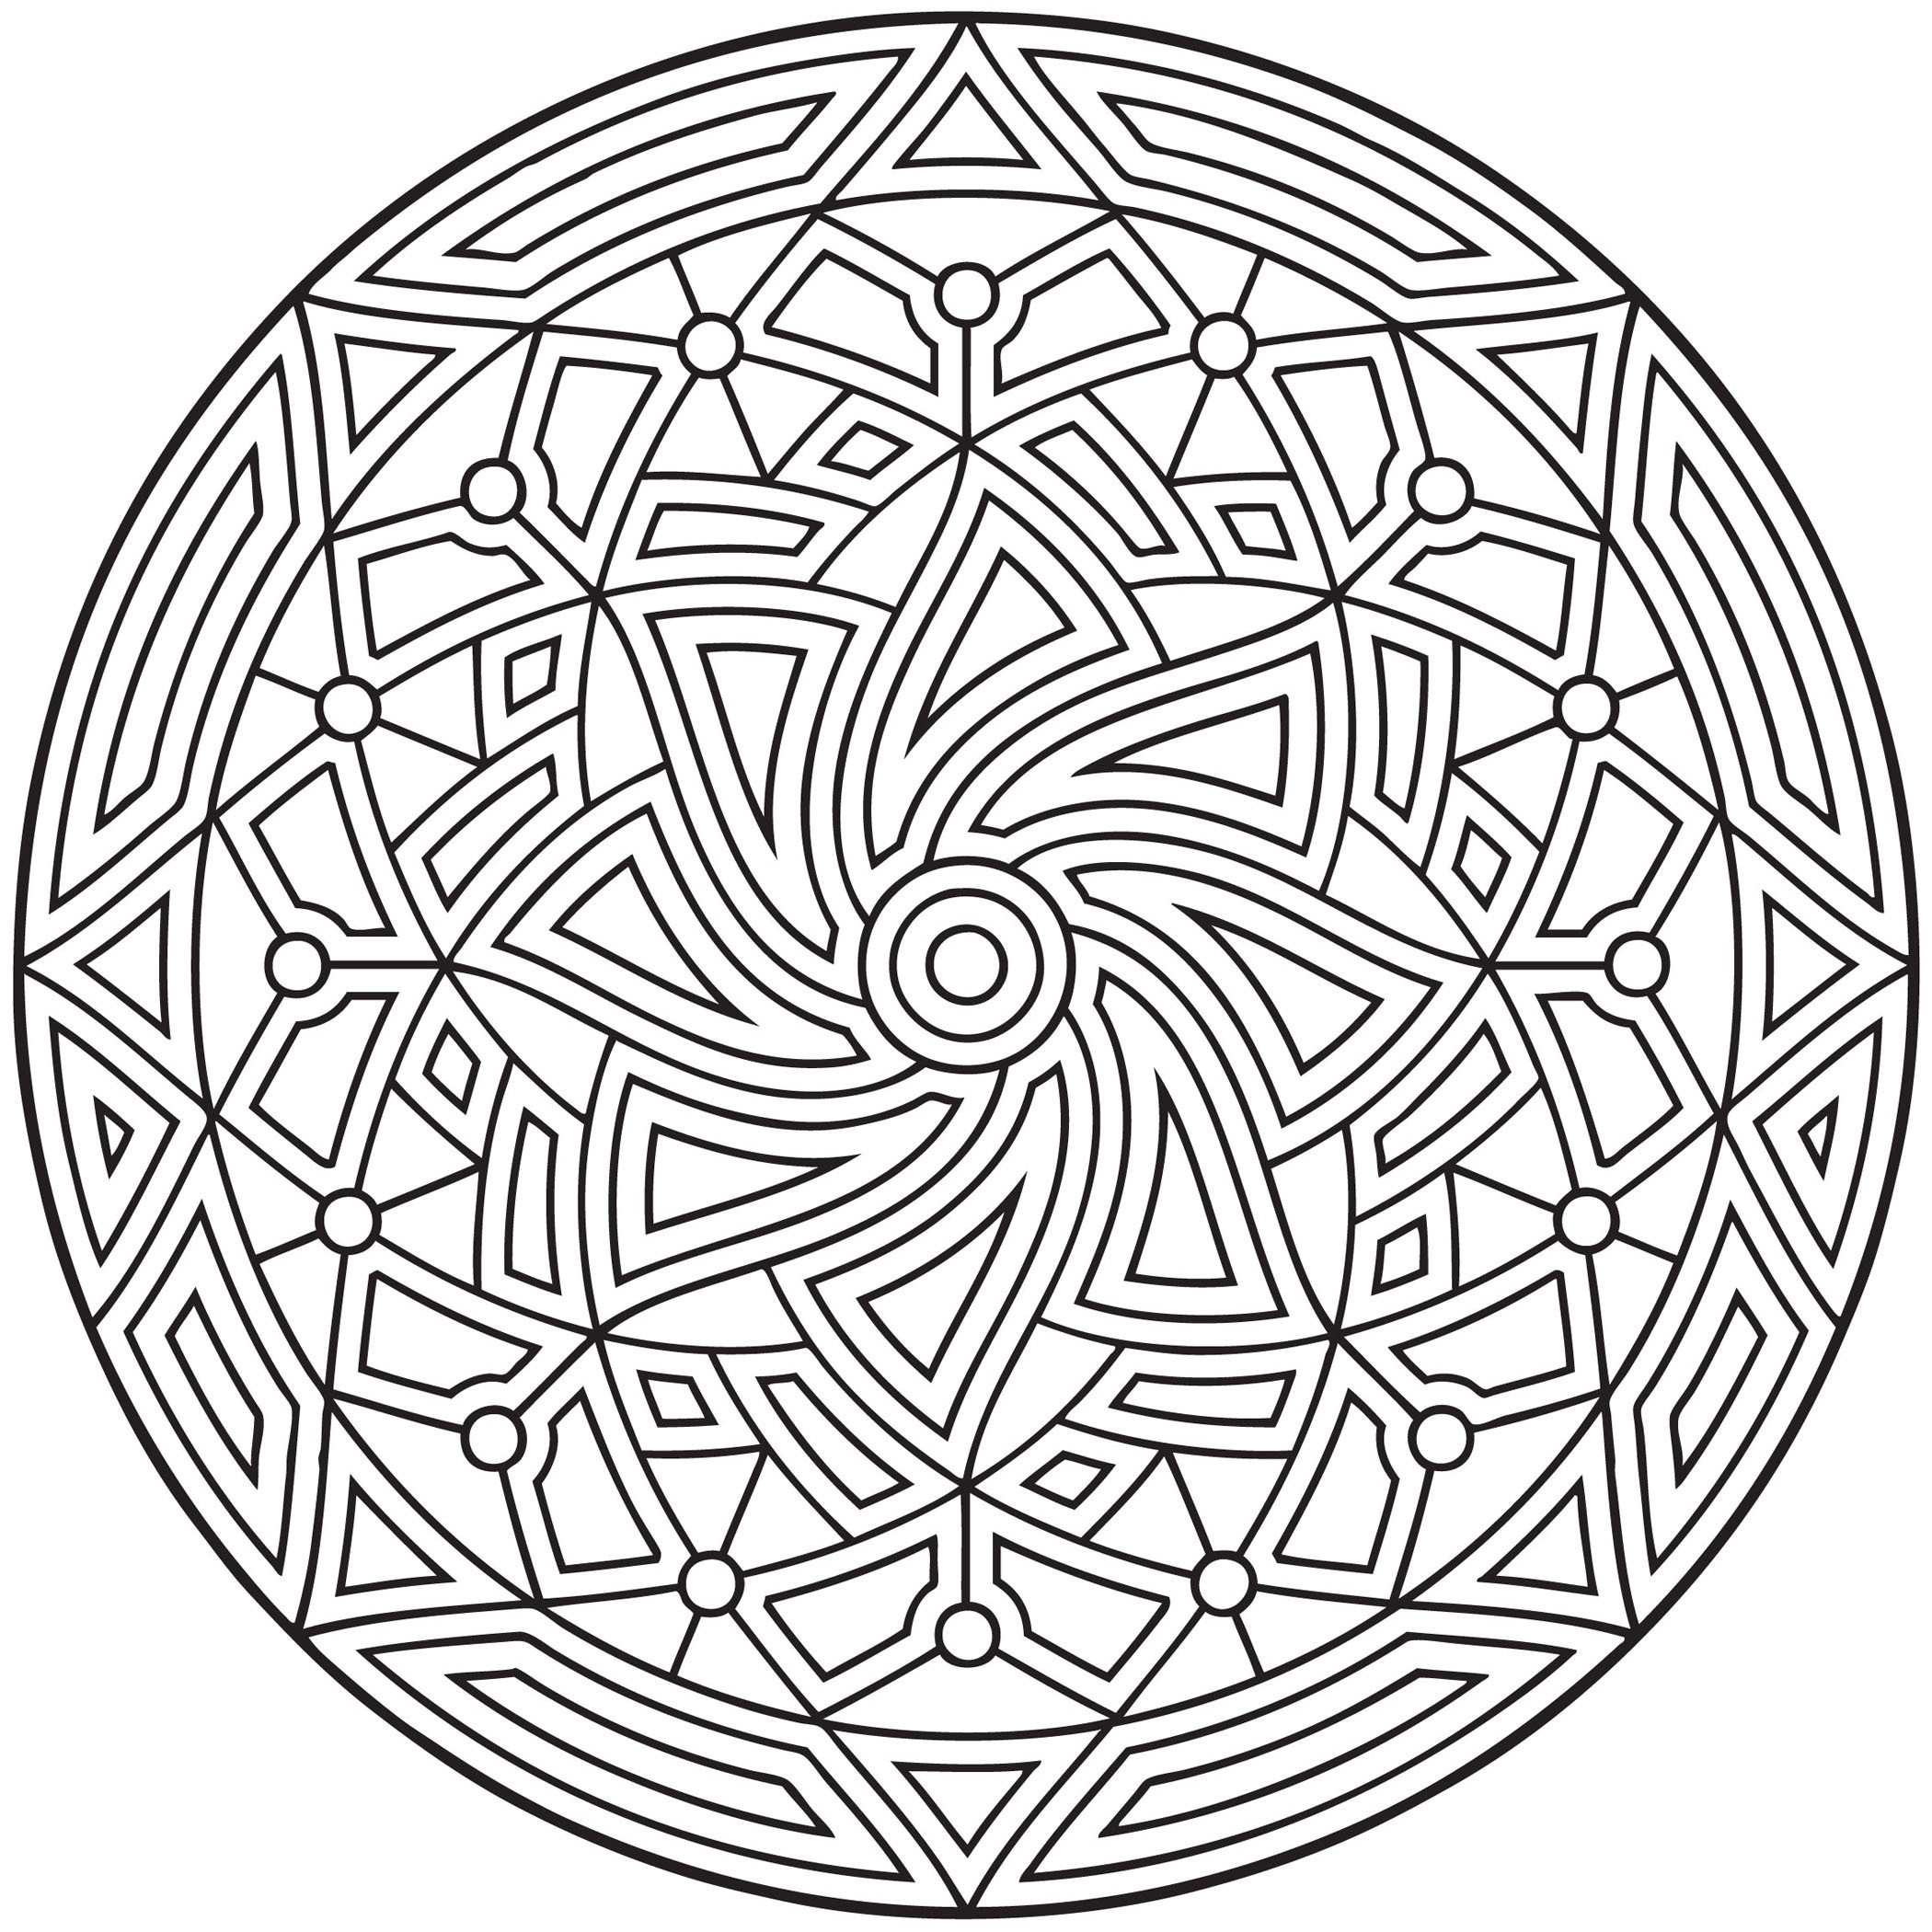 Free Geometric Coloring Pages For Adults
 Free Printable Geometric Coloring Pages For Kids